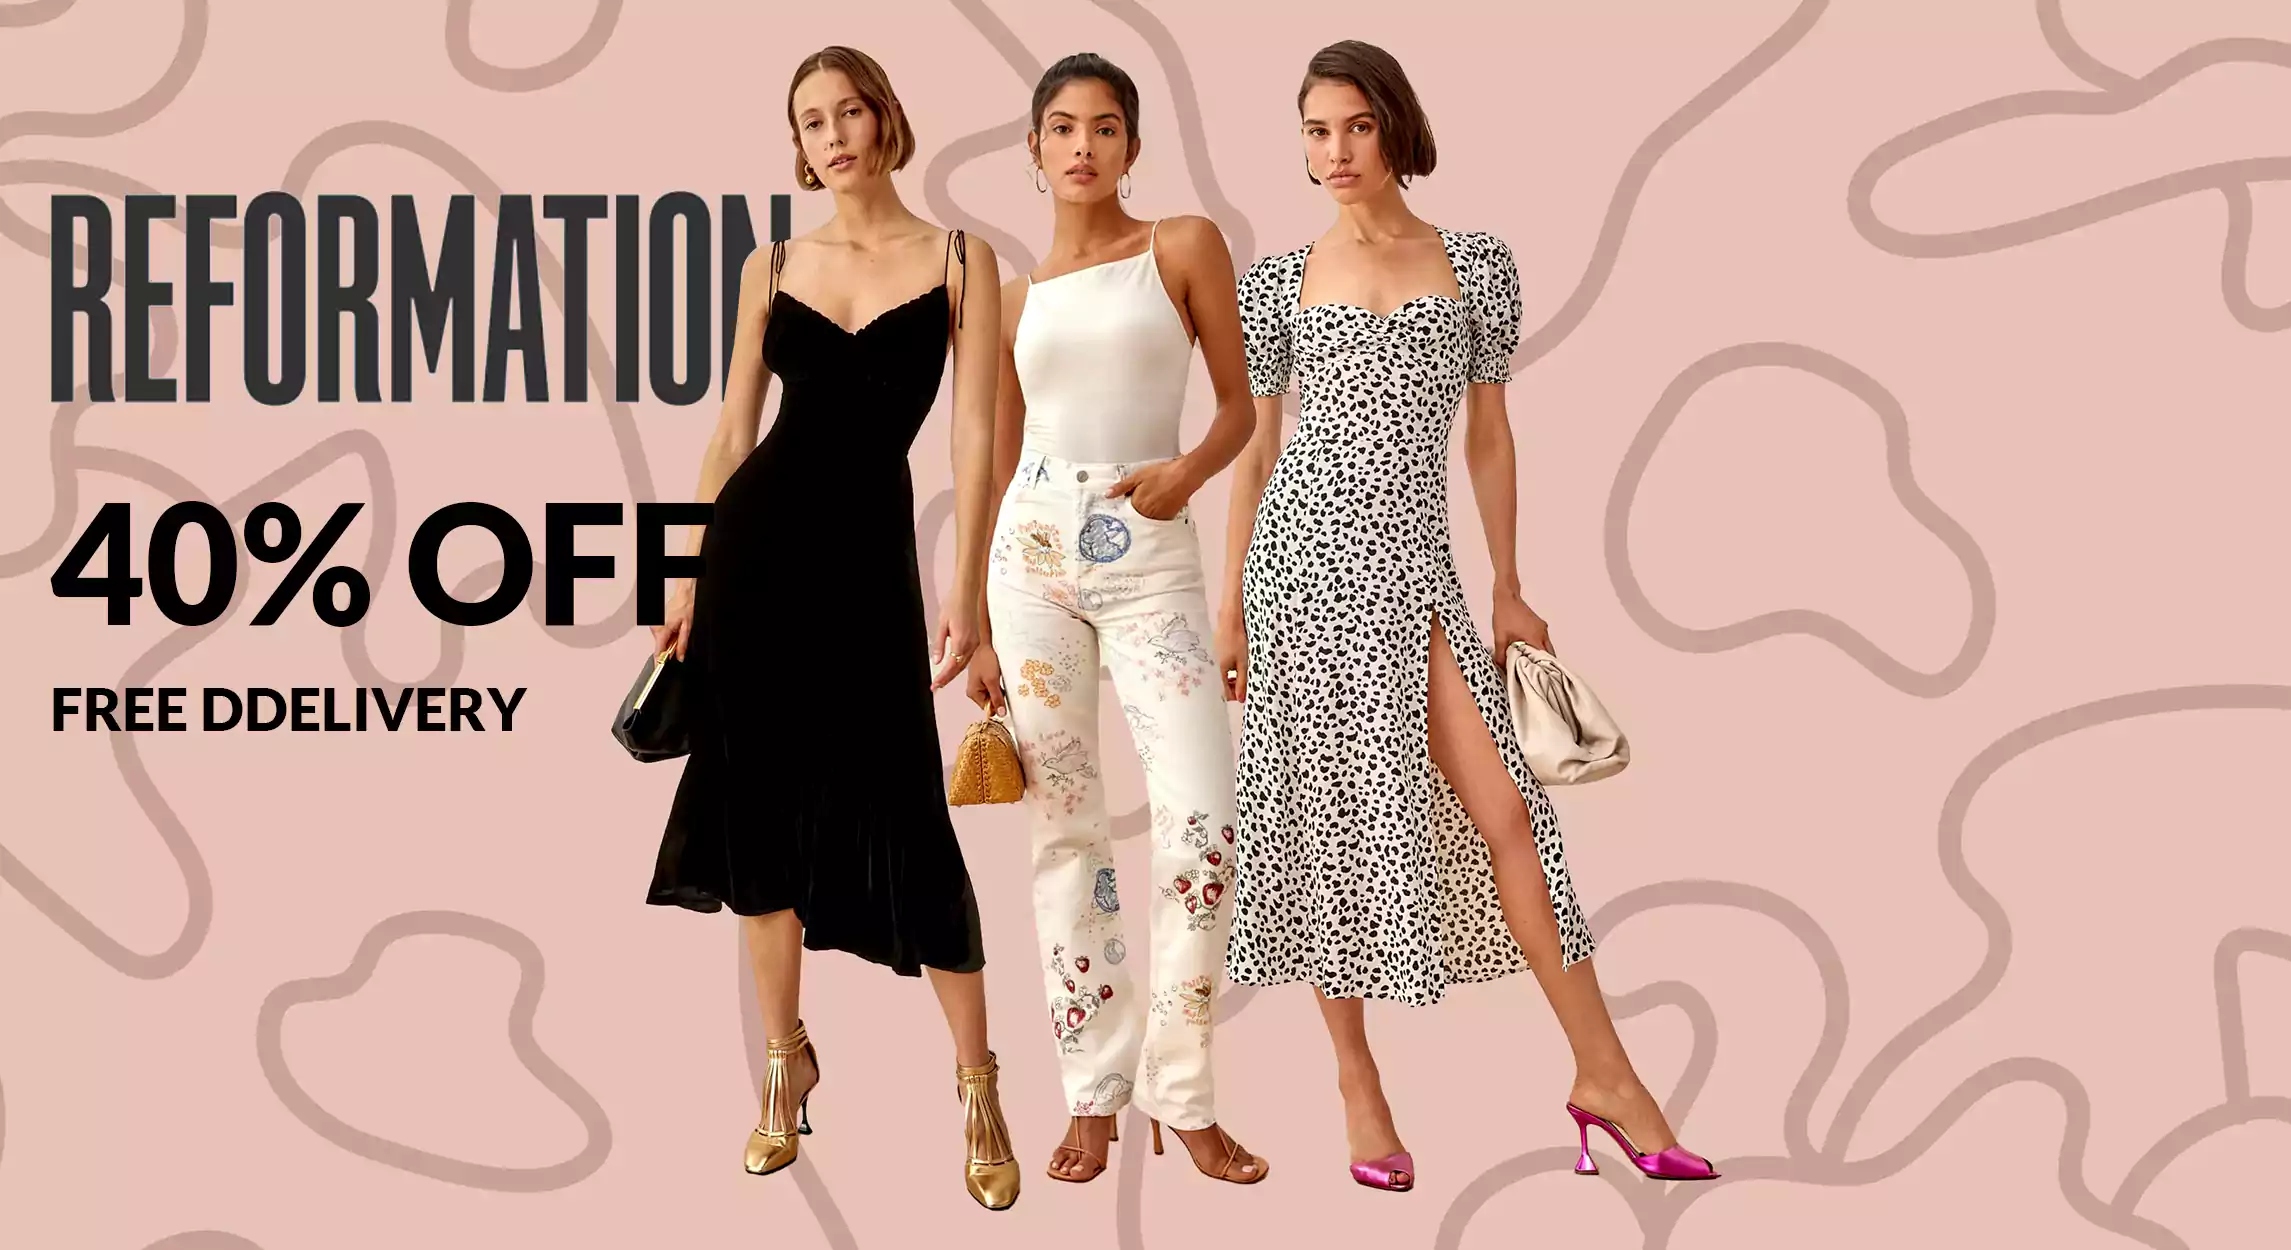 Reformation 40% off + Free Delivery 